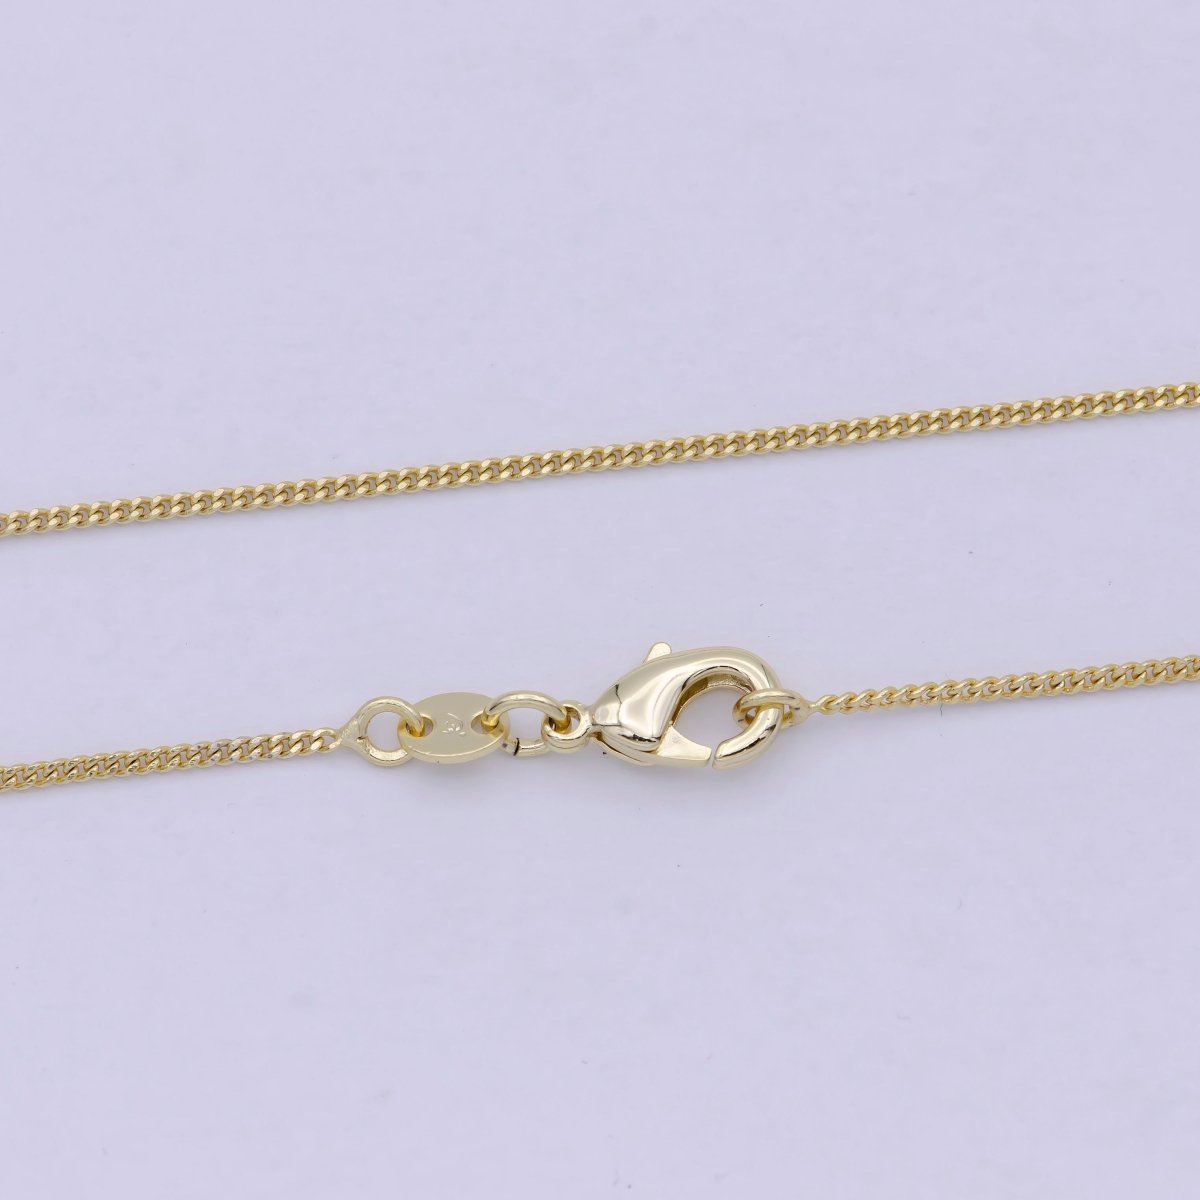 24K Gold Filled Curb Chain Necklace, 17.7 Inch Curb Chain Necklace, Dainty 1mm Link Necklace w/ Lobster Clasp | WA-811 Clearance Pricing - DLUXCA